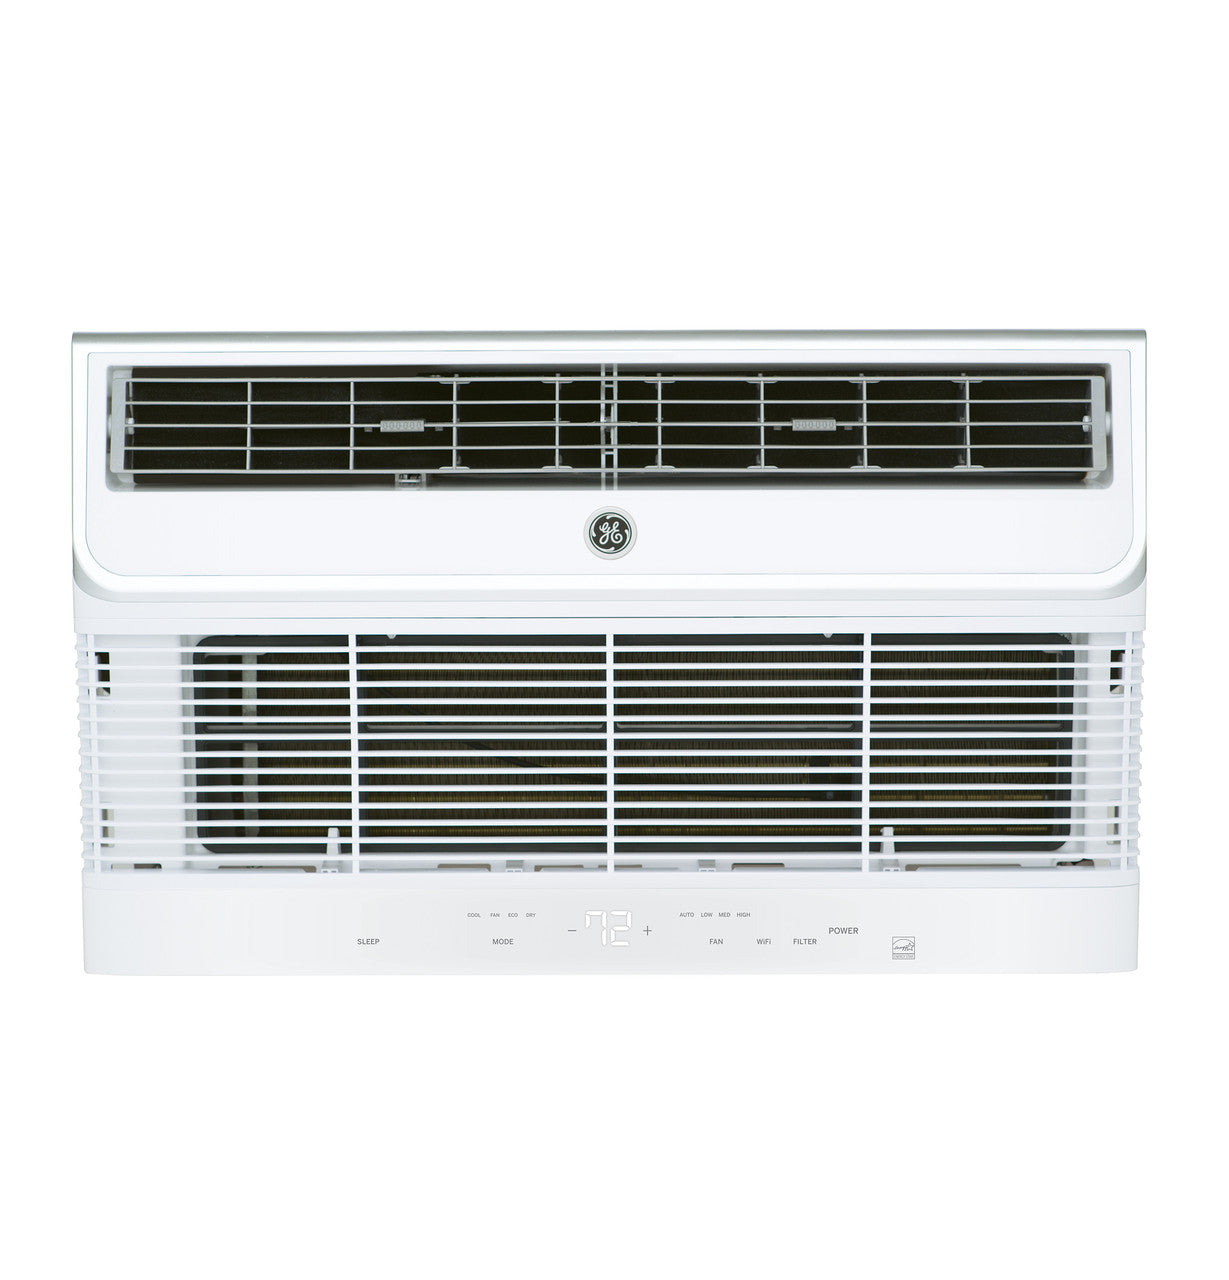 GE 10,000 BTU 208/230 Volt Through-the-Wall Air Conditioner: Cooling Only - AJCM10DWJ